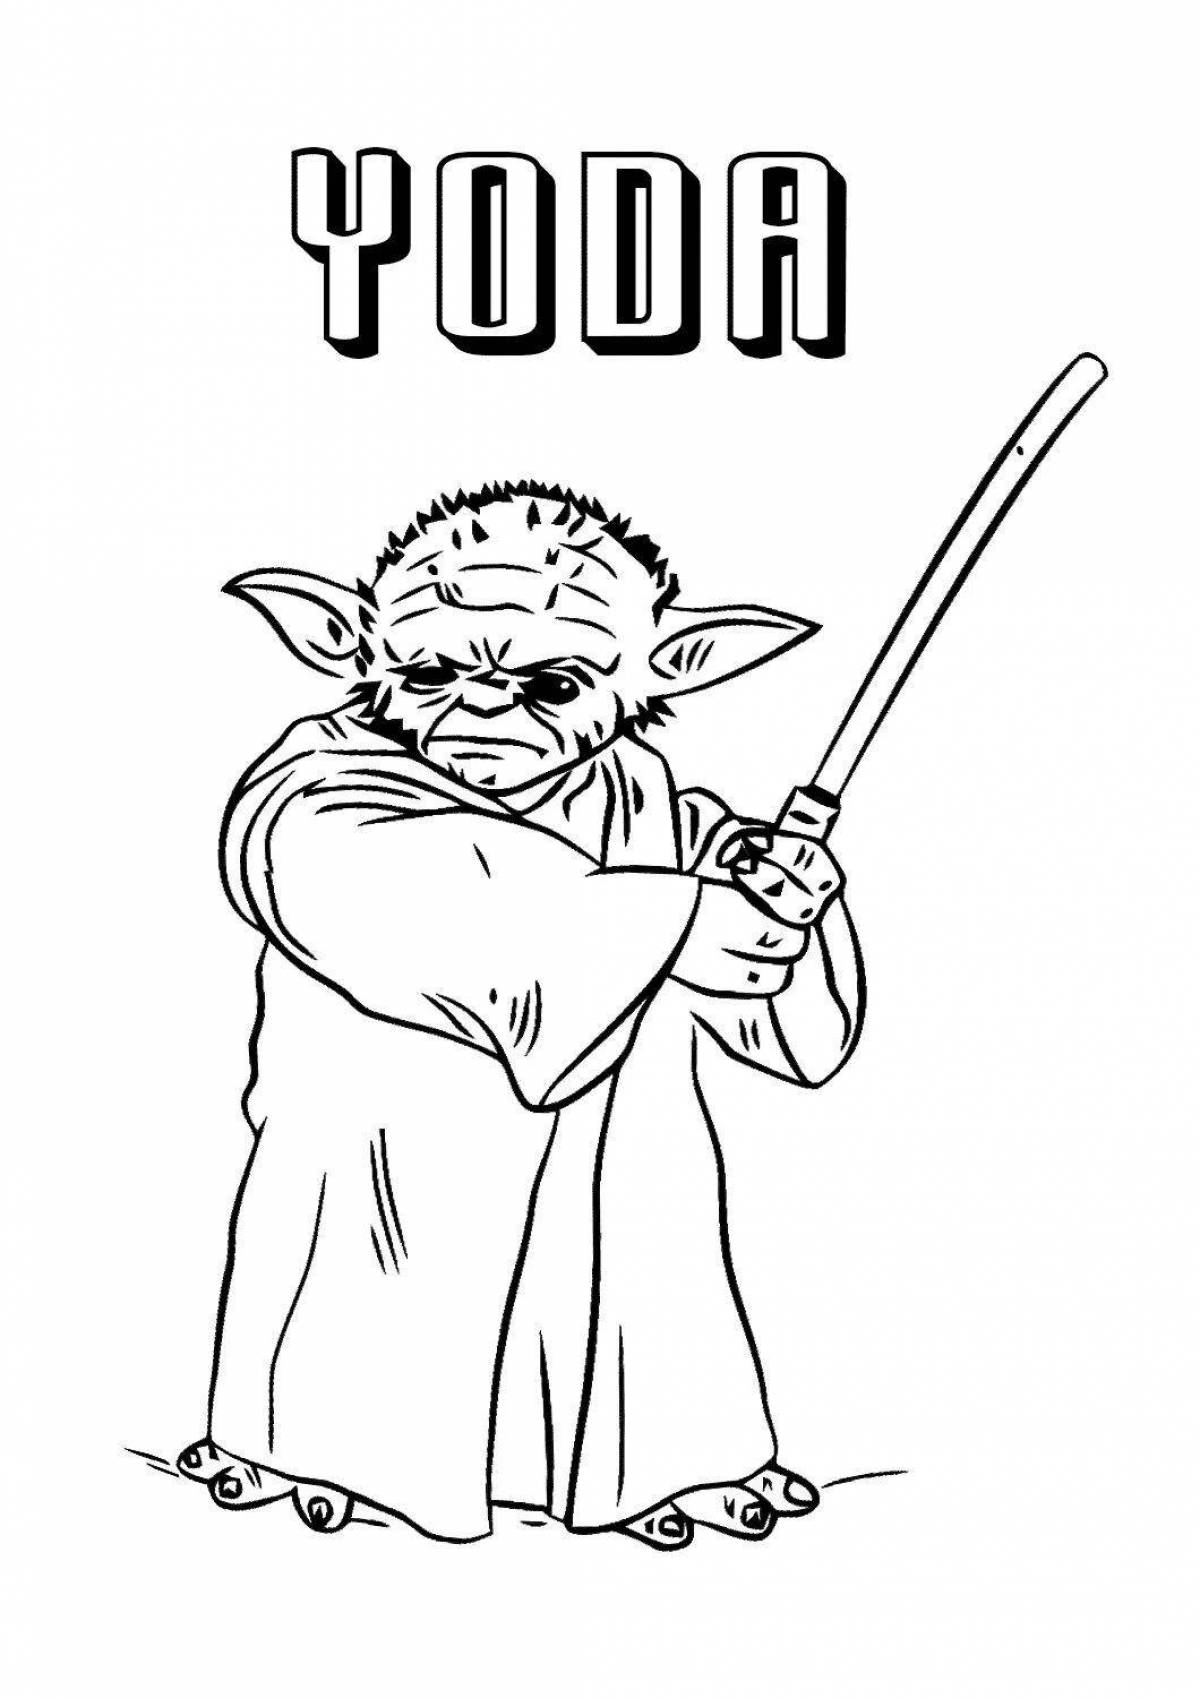 Master yoda's artfully crafted coloring page